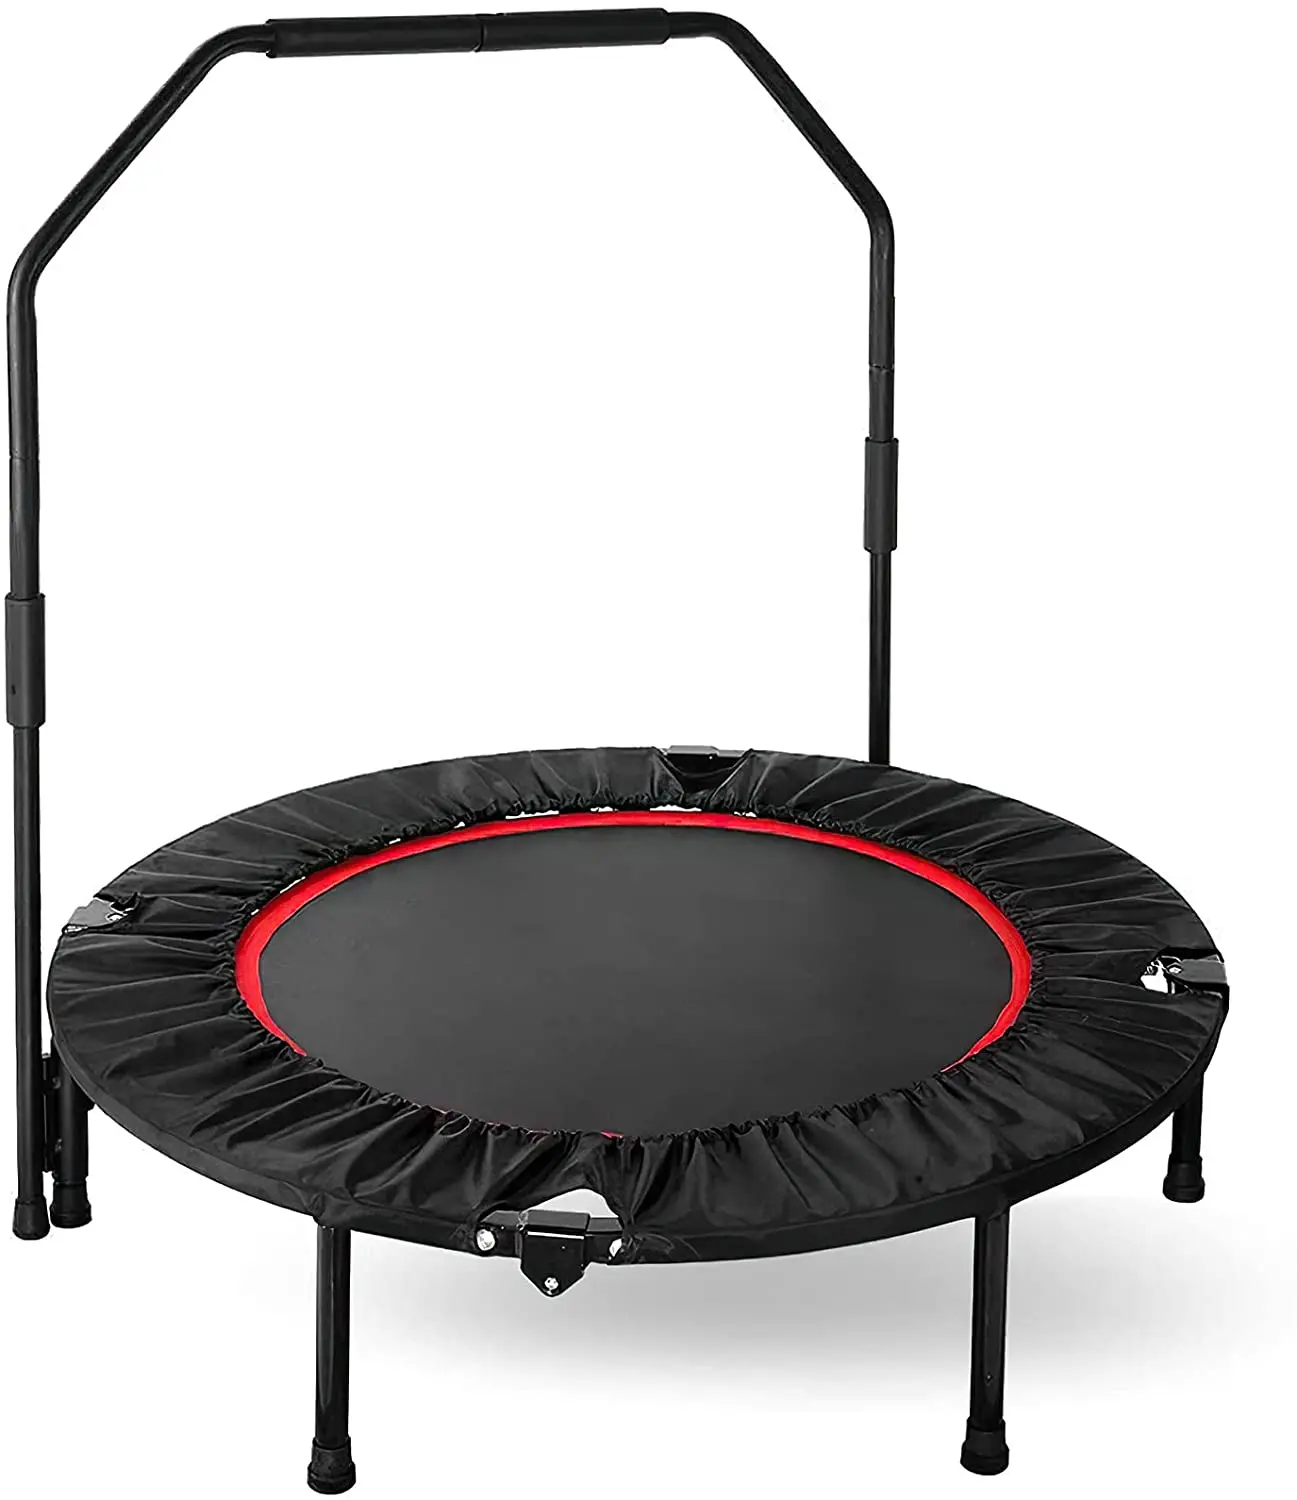 

Trampoline Fitness folding, Dia 101.6 cm, with handle 3 way adjustable in height and cover rim and rubber cords, charge max 150 kg